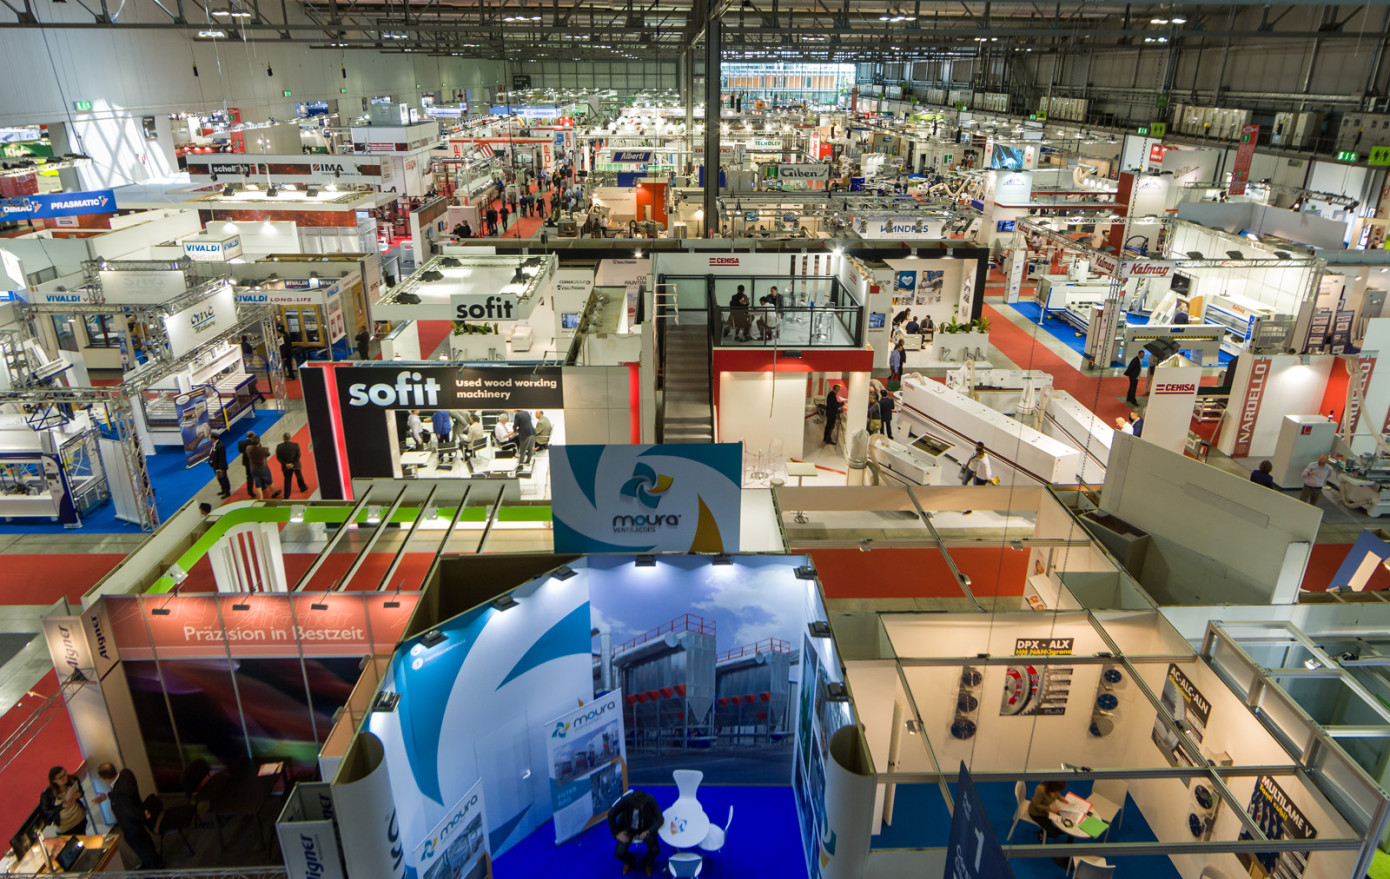 Six months before opening, 220 exhibitors register for Xylexpo trade fair in Milan